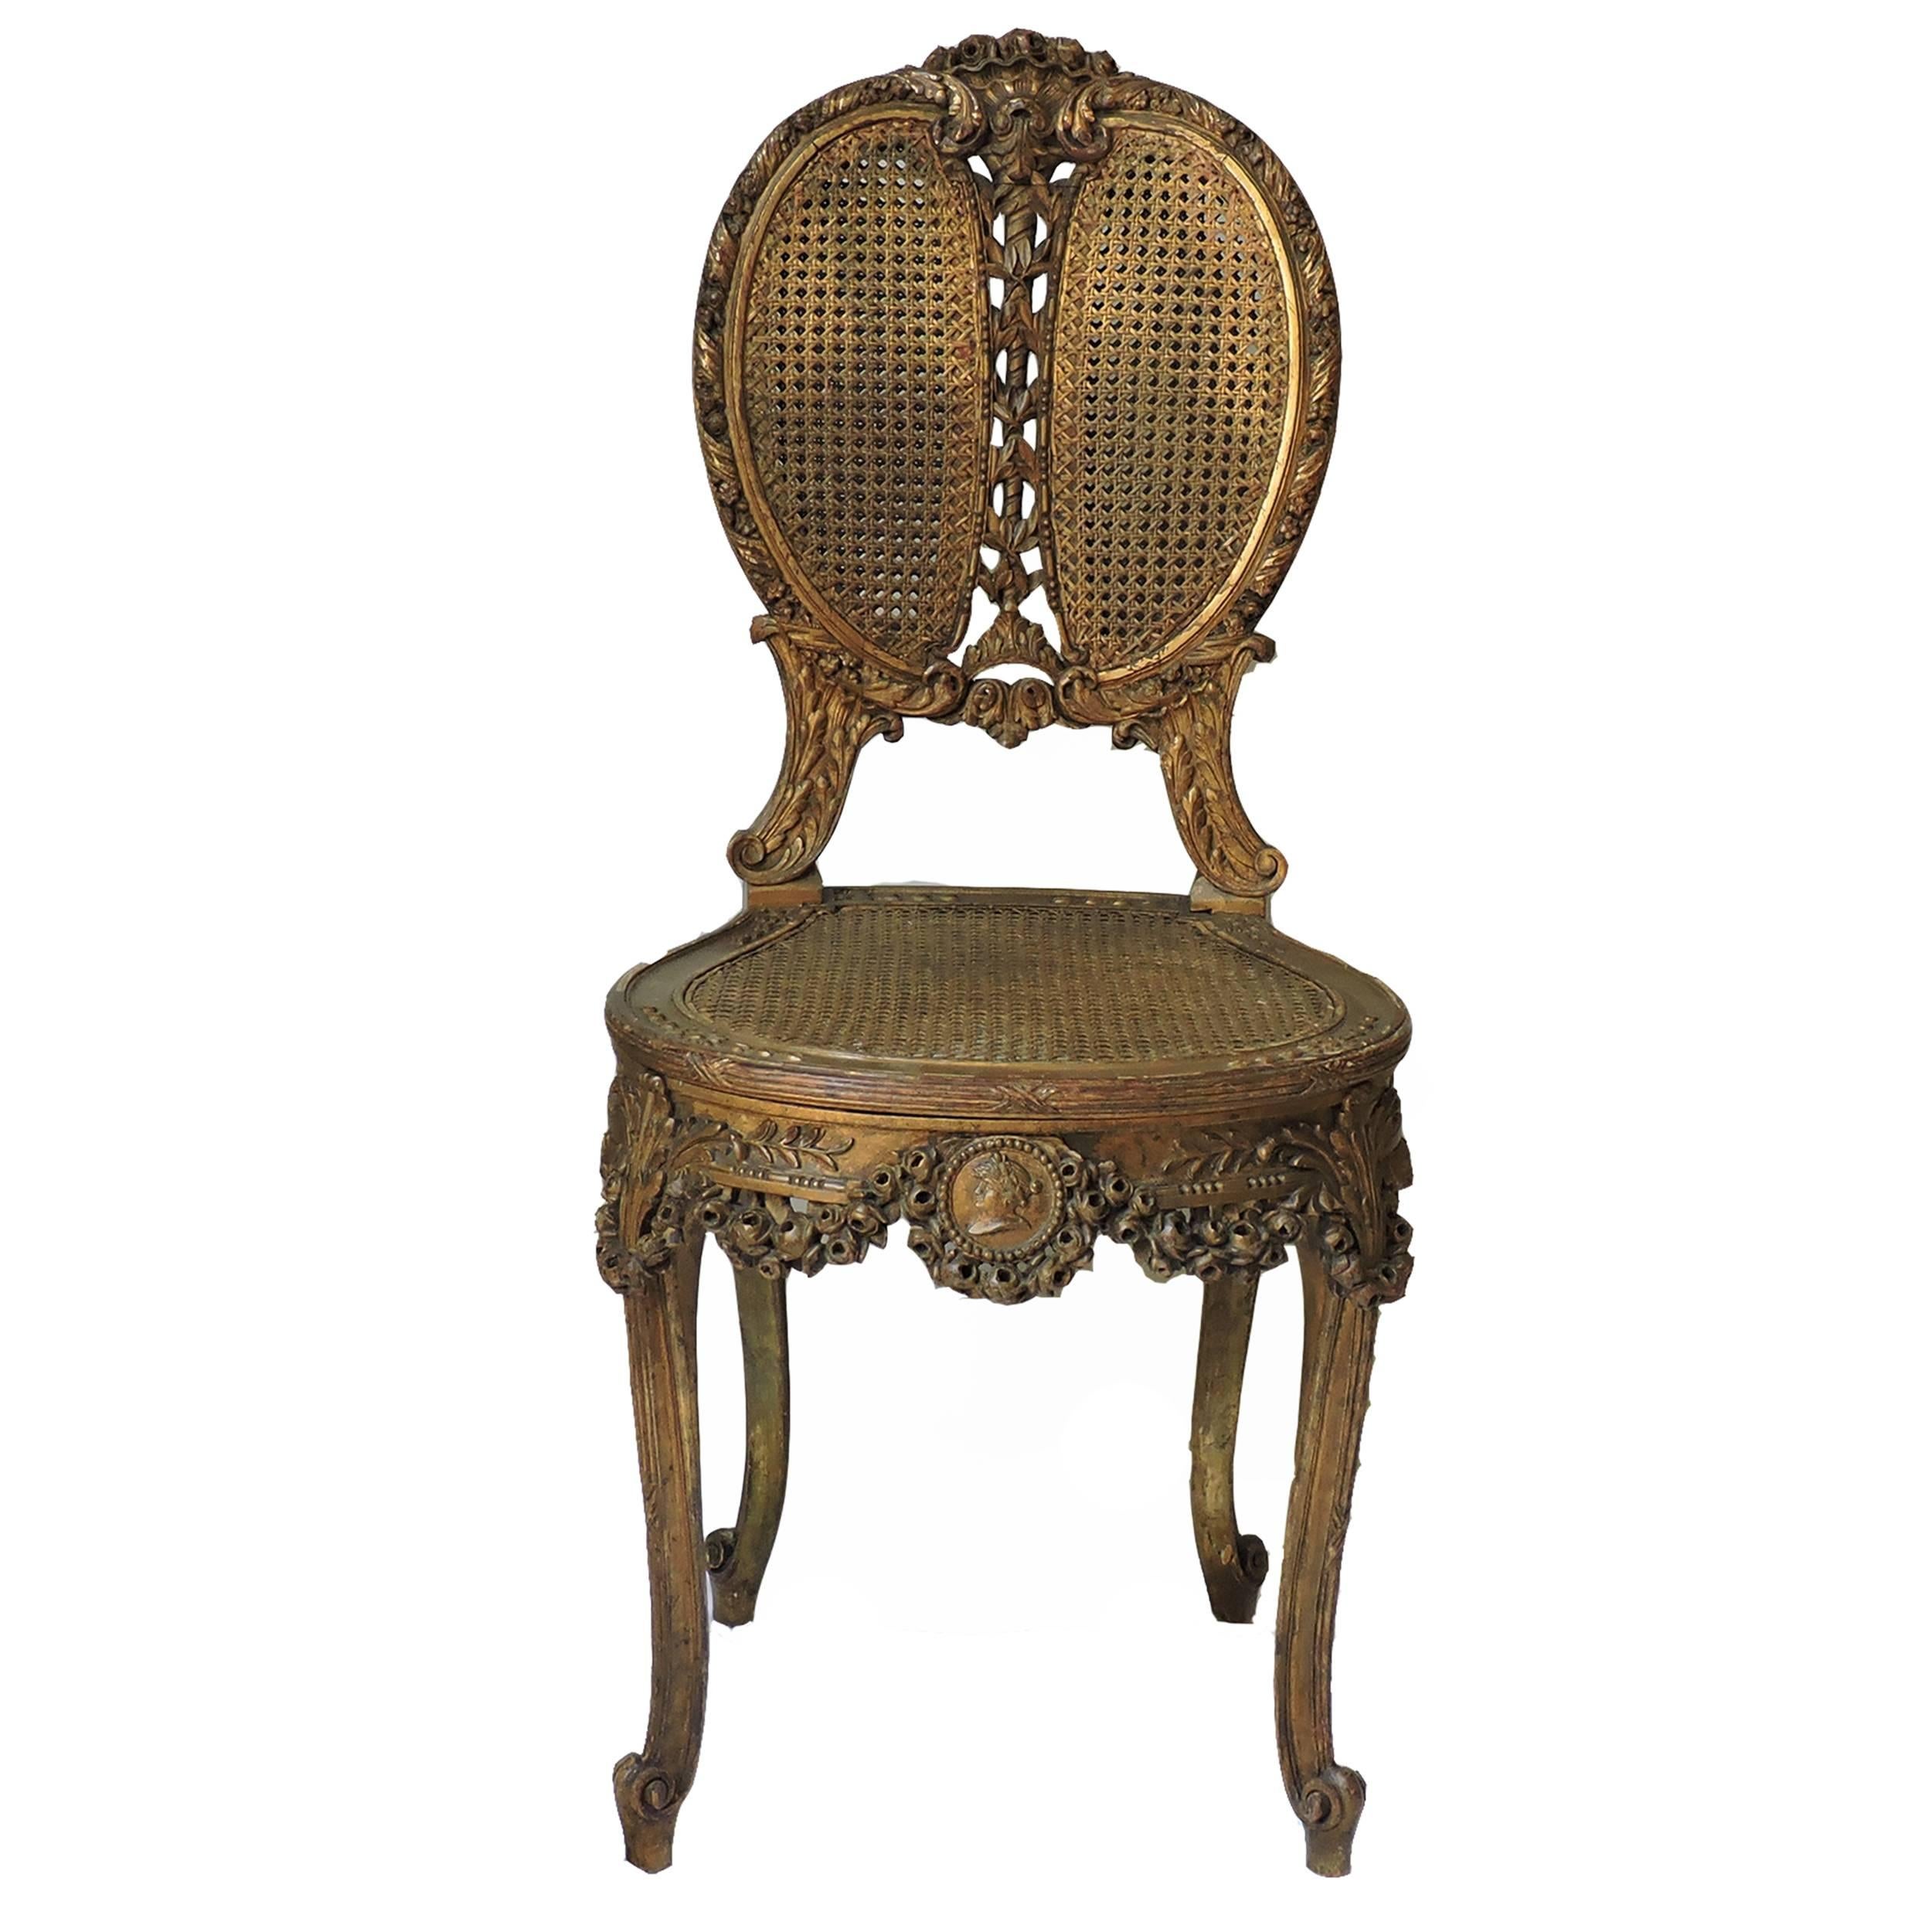 Finely carved Louis XIV giltwood chair with caned back and seat. Chair apron and legs are decorated with a floral motif. Caning is in excellent condition.